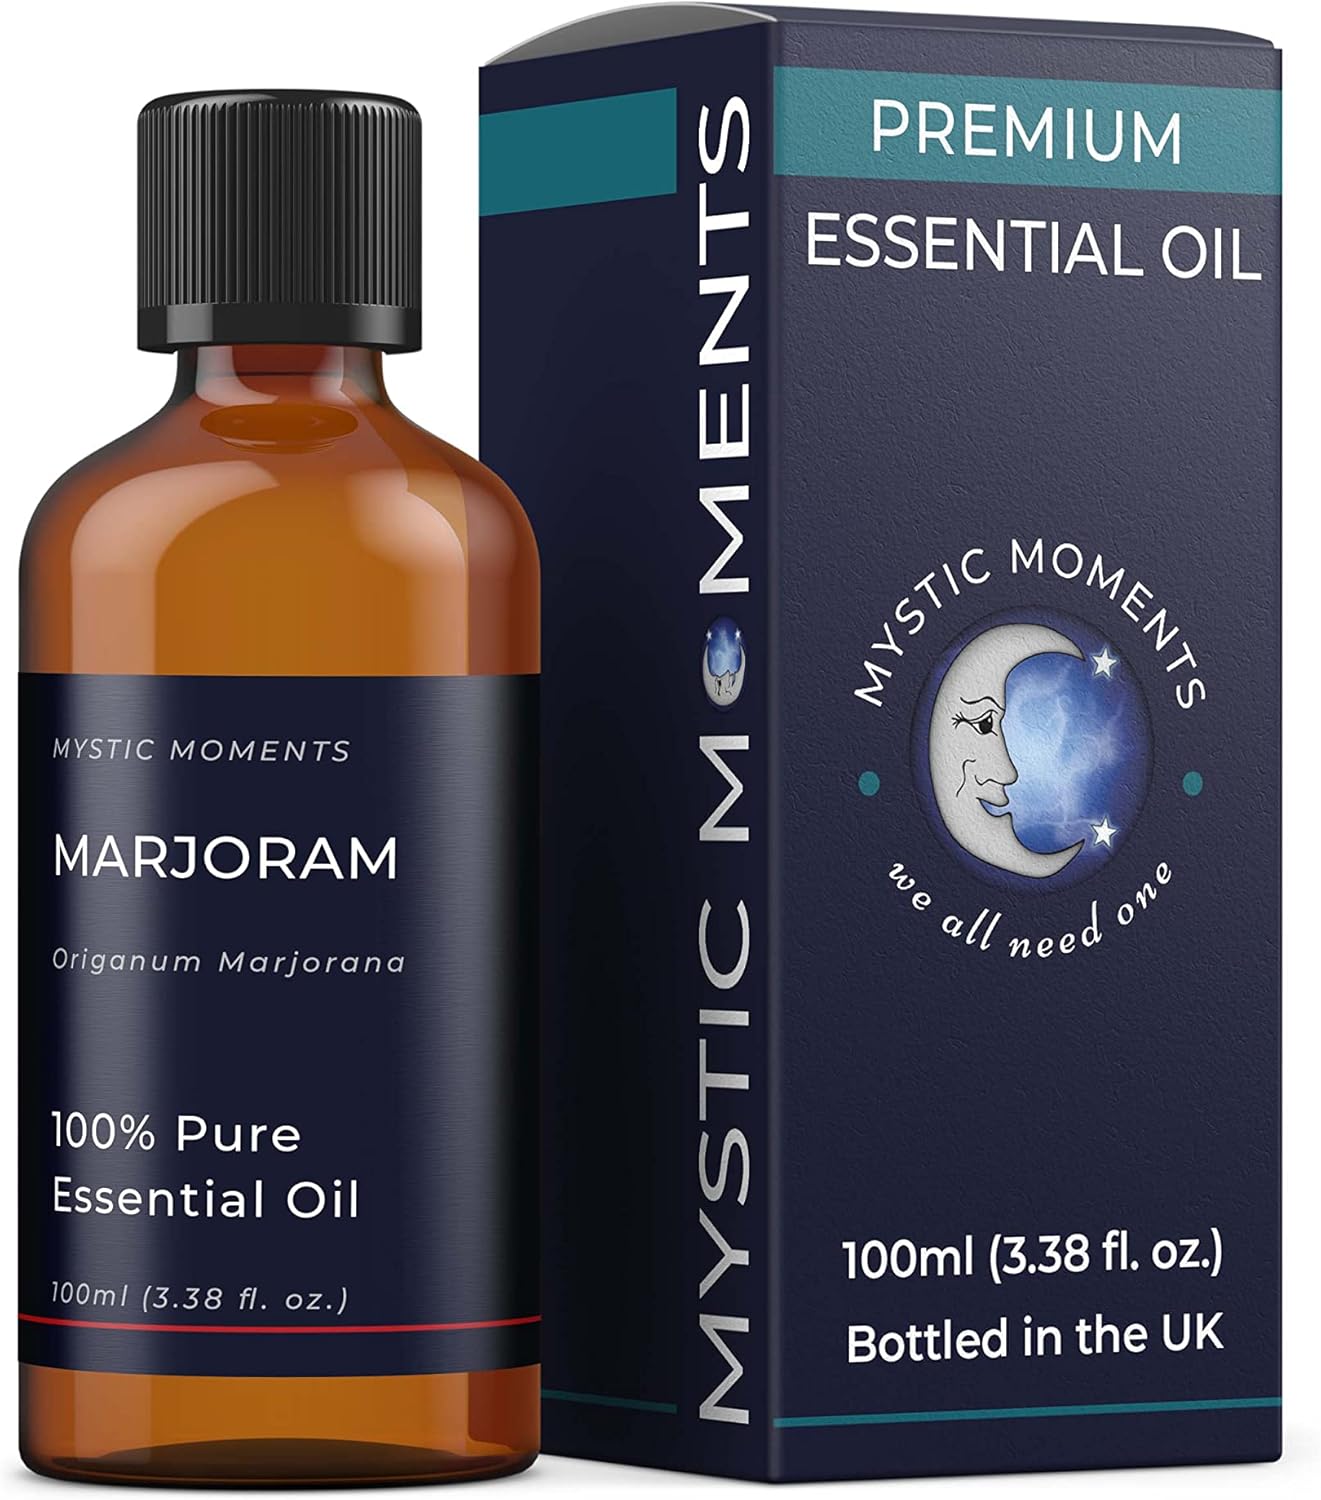 Mystic Moments | Marjoram Essential Oil 100ml - Pure & Natural oil for Diffusers, Aromatherapy & Massage Blends Vegan GMO Free